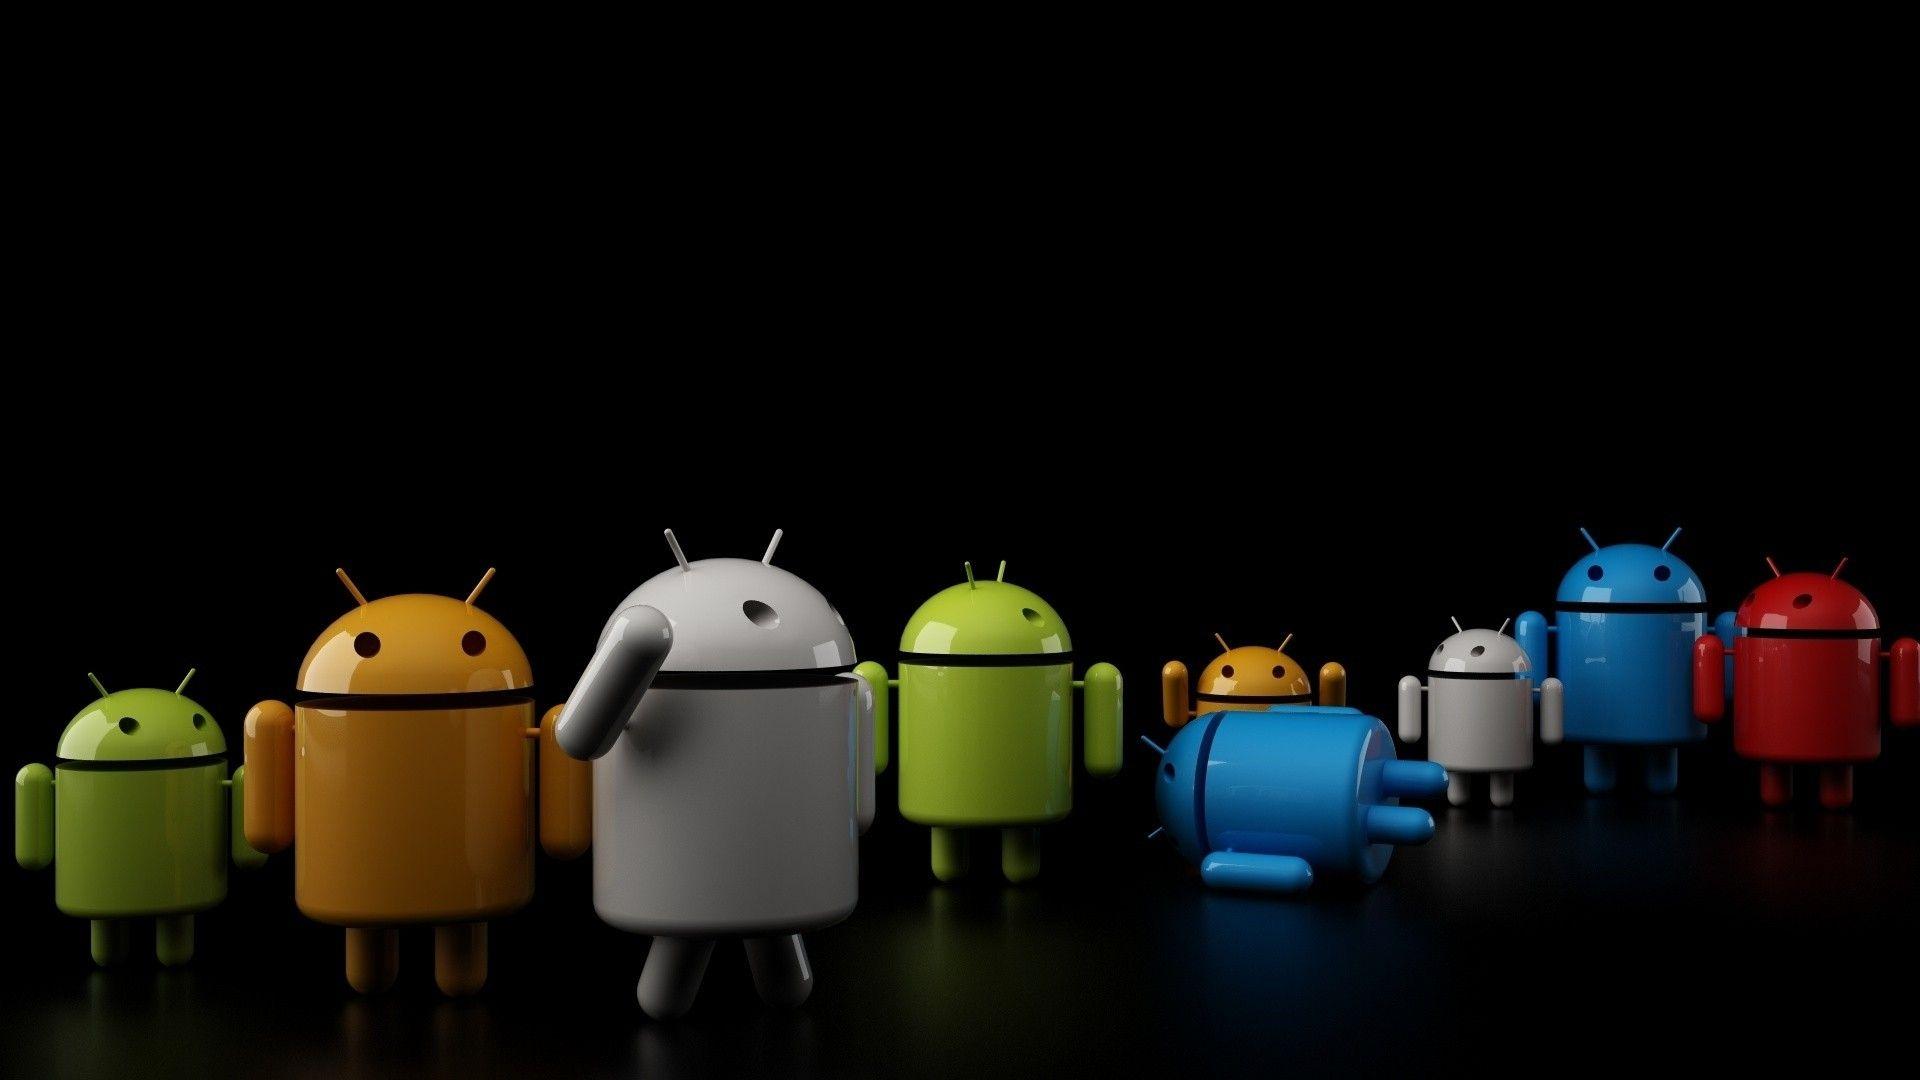 Download Wallpaper 1920x1080 android, os, robot, gray, blue, green